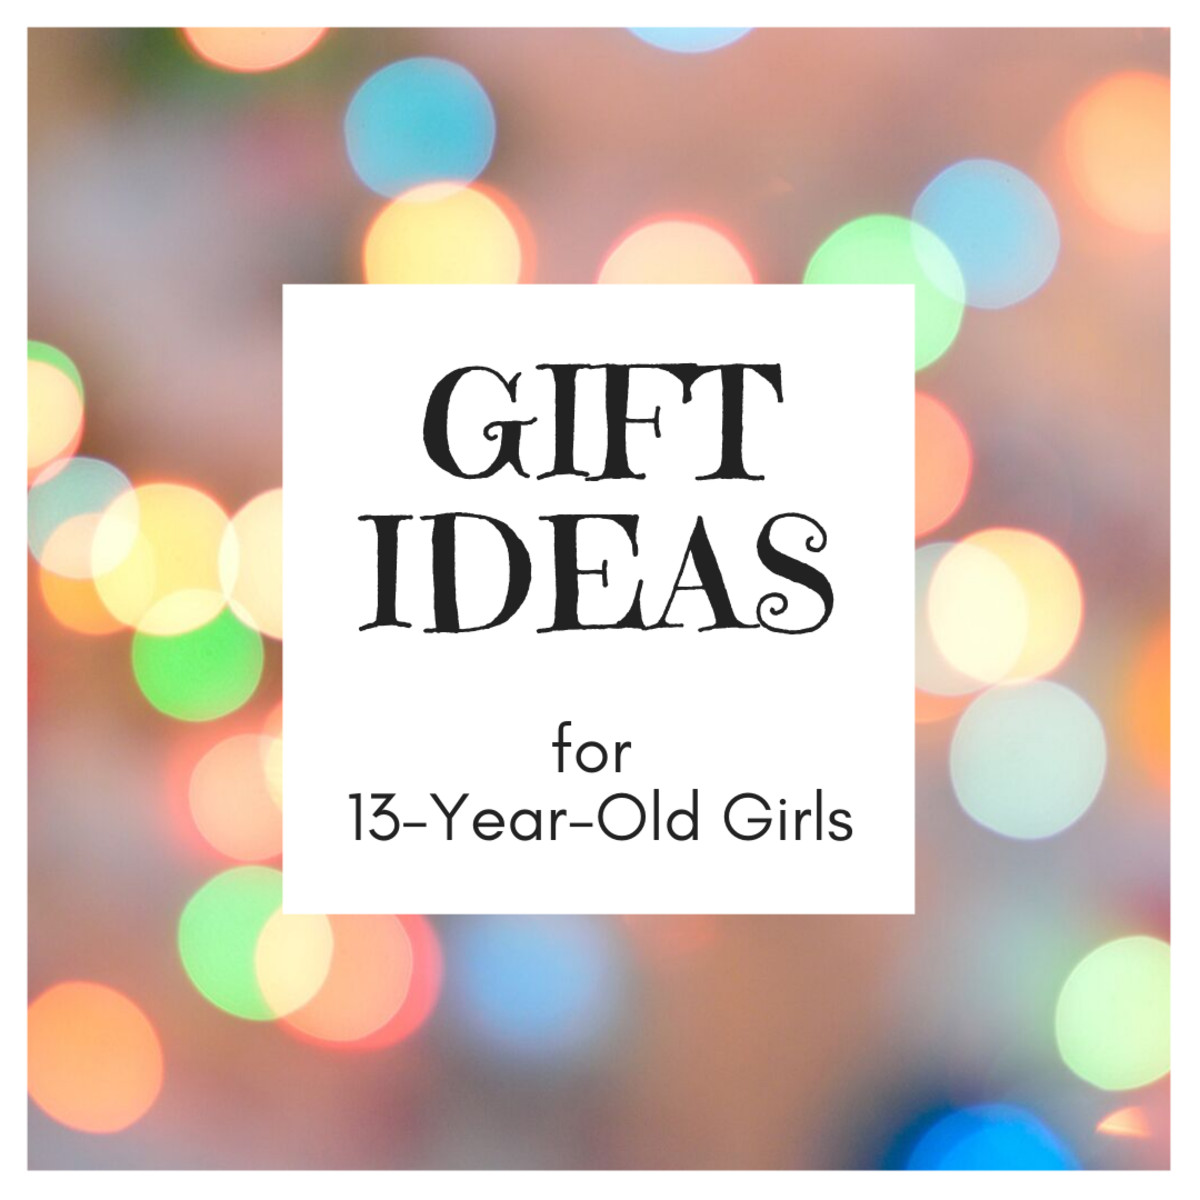 Gift Ideas For 13 Year Old Girls
 Best Gift Ideas for 13 Year Old Girls Holidappy